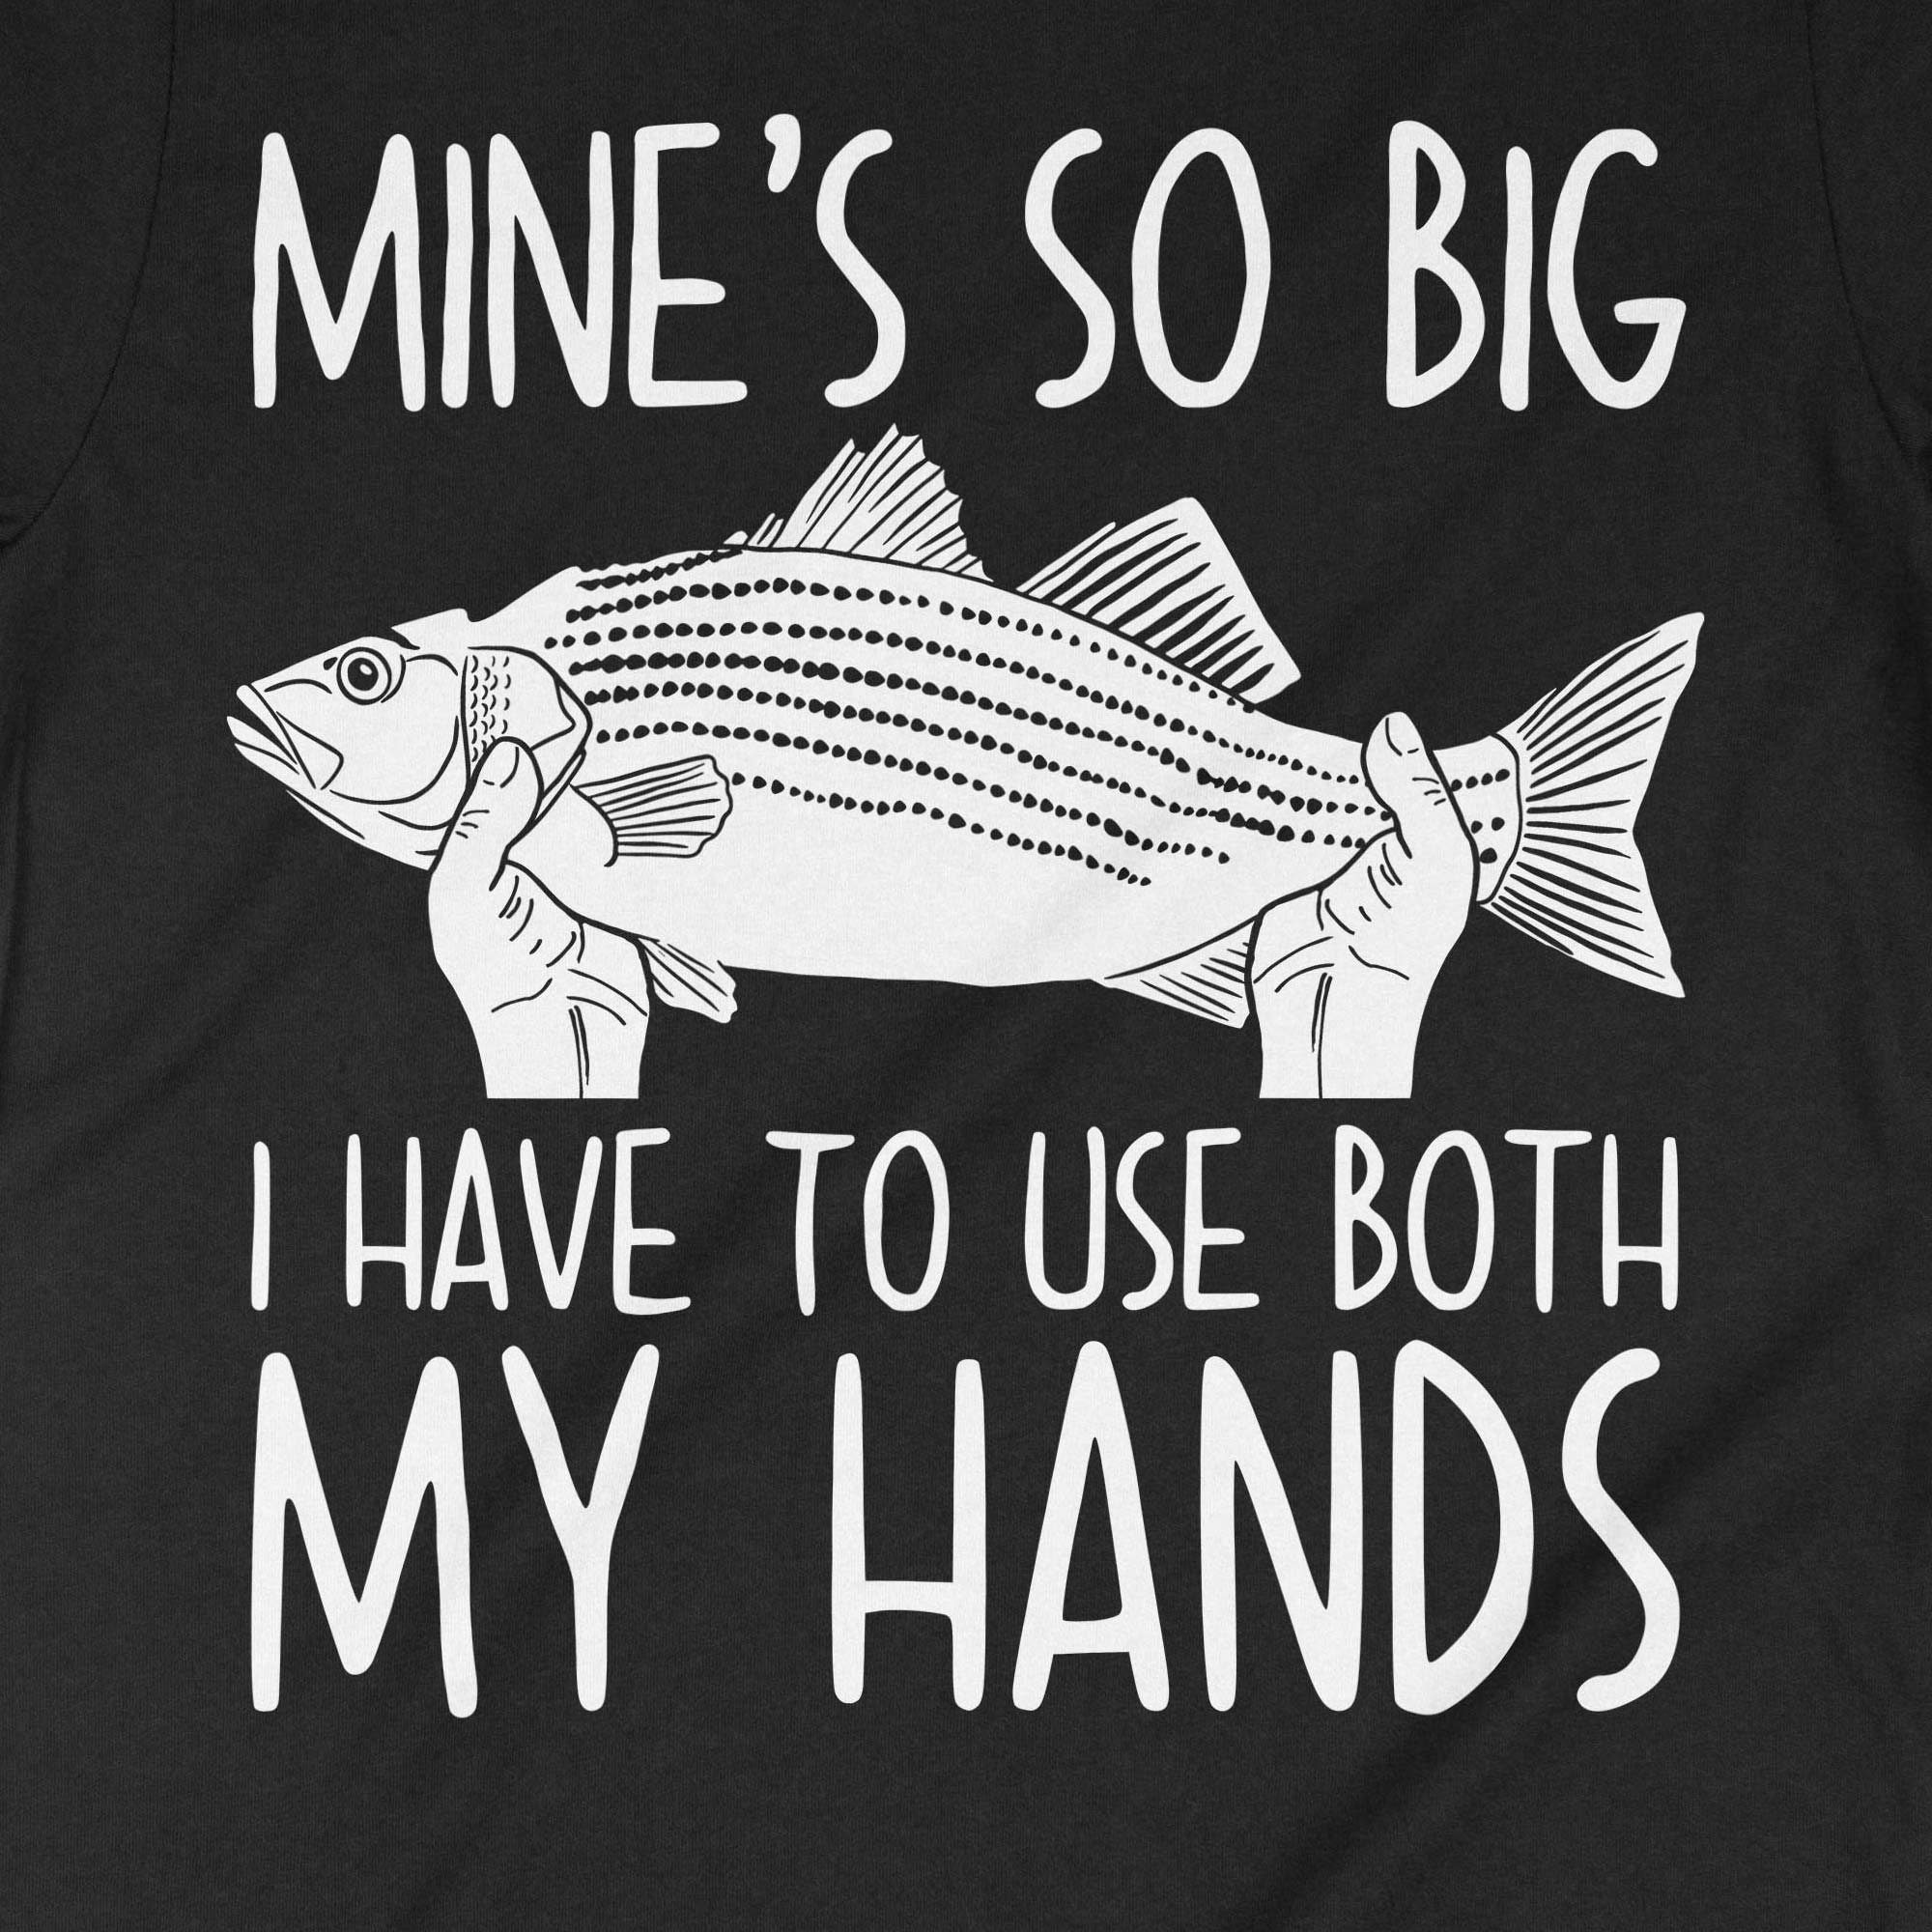 Mines so Big I Have to Use Two Hands, Fishing T-shirt, Fisherman Gifts,  Sarcastic Angler Tee -  Canada